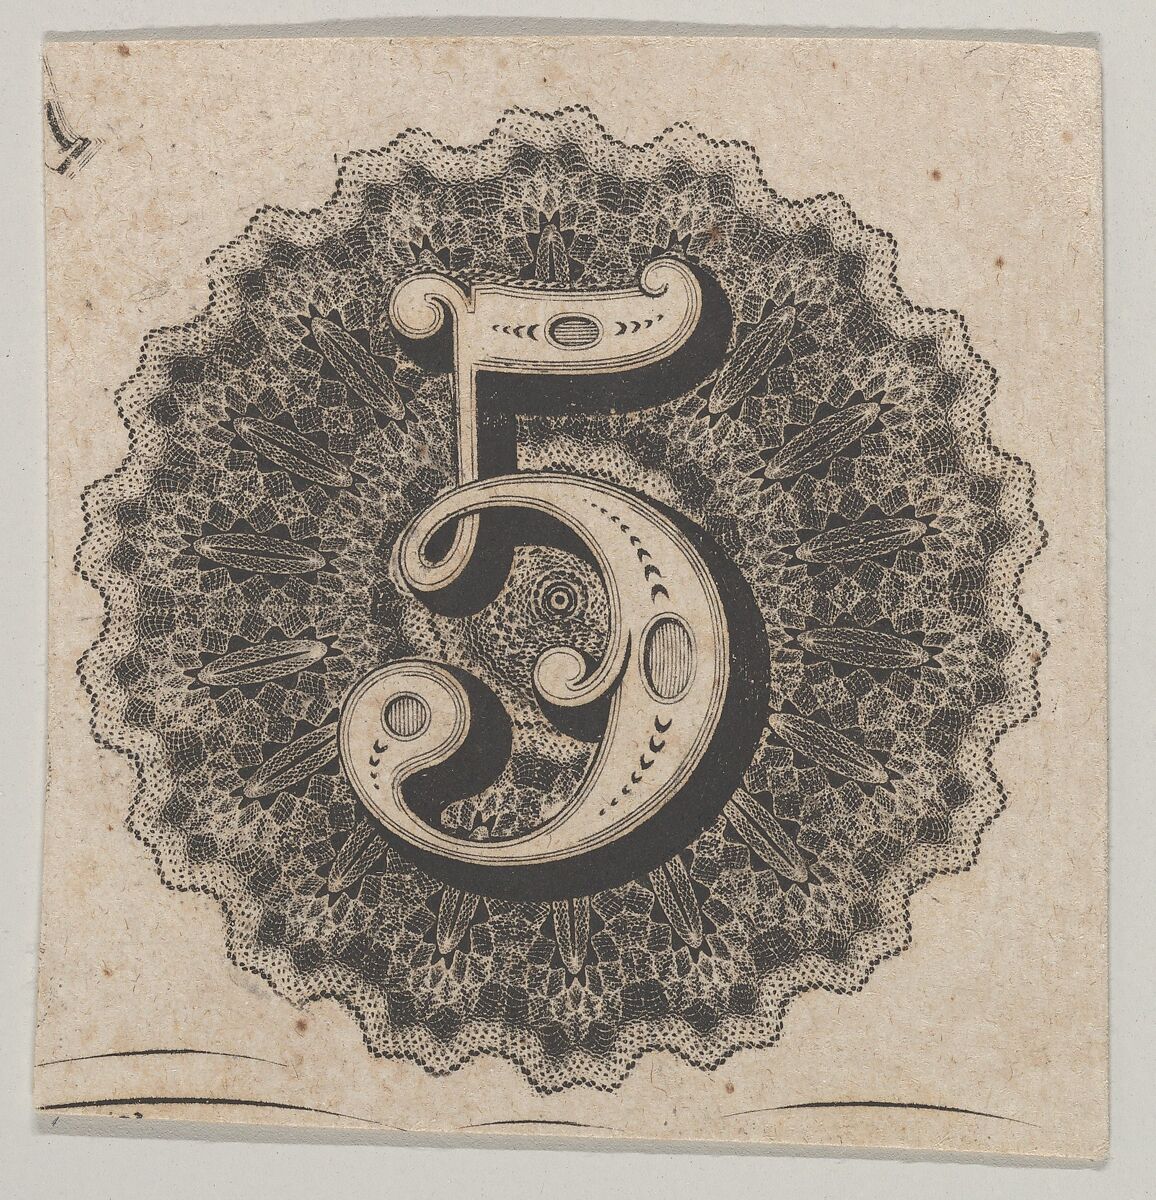 Banknote motif: number 5 against a circular panel of lace-like lathe work with a scalloped edge, Associated with Cyrus Durand (American, 1787–1868), Engraving; proof 